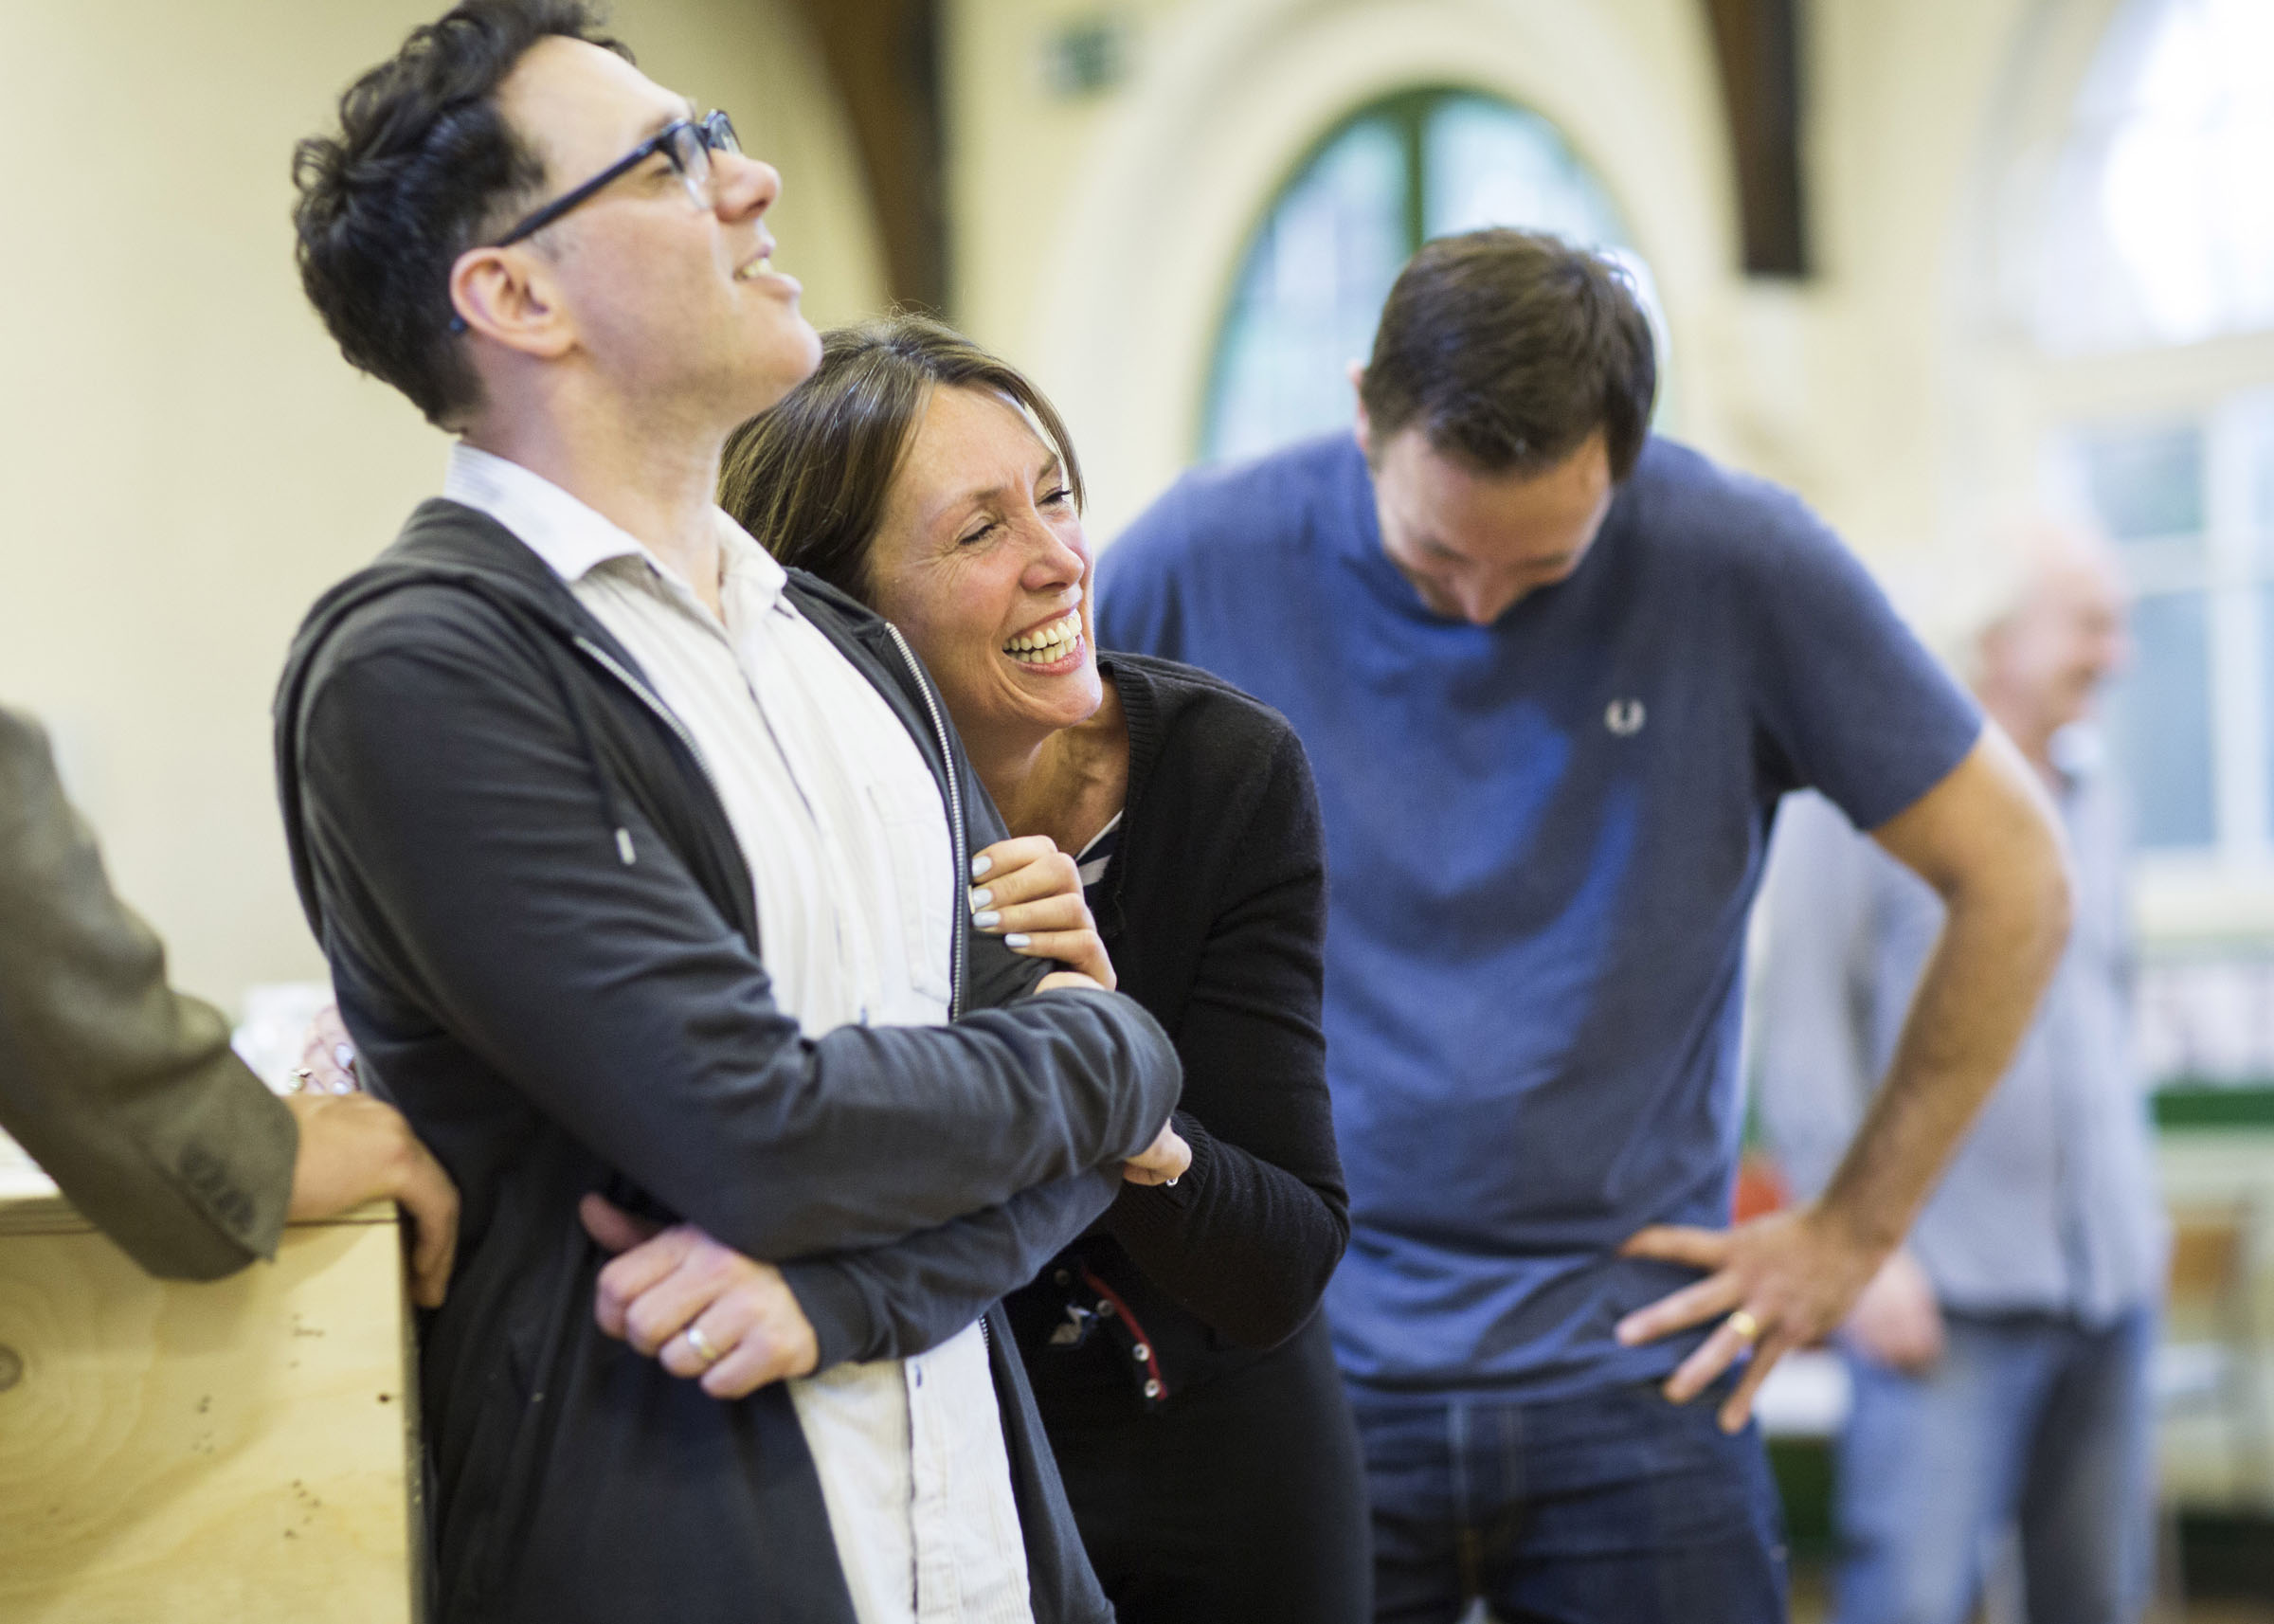 Reece Shearsmith (Syd) and Sally Rogers (Alice) laugh during rehearsals for 'Hangmen'